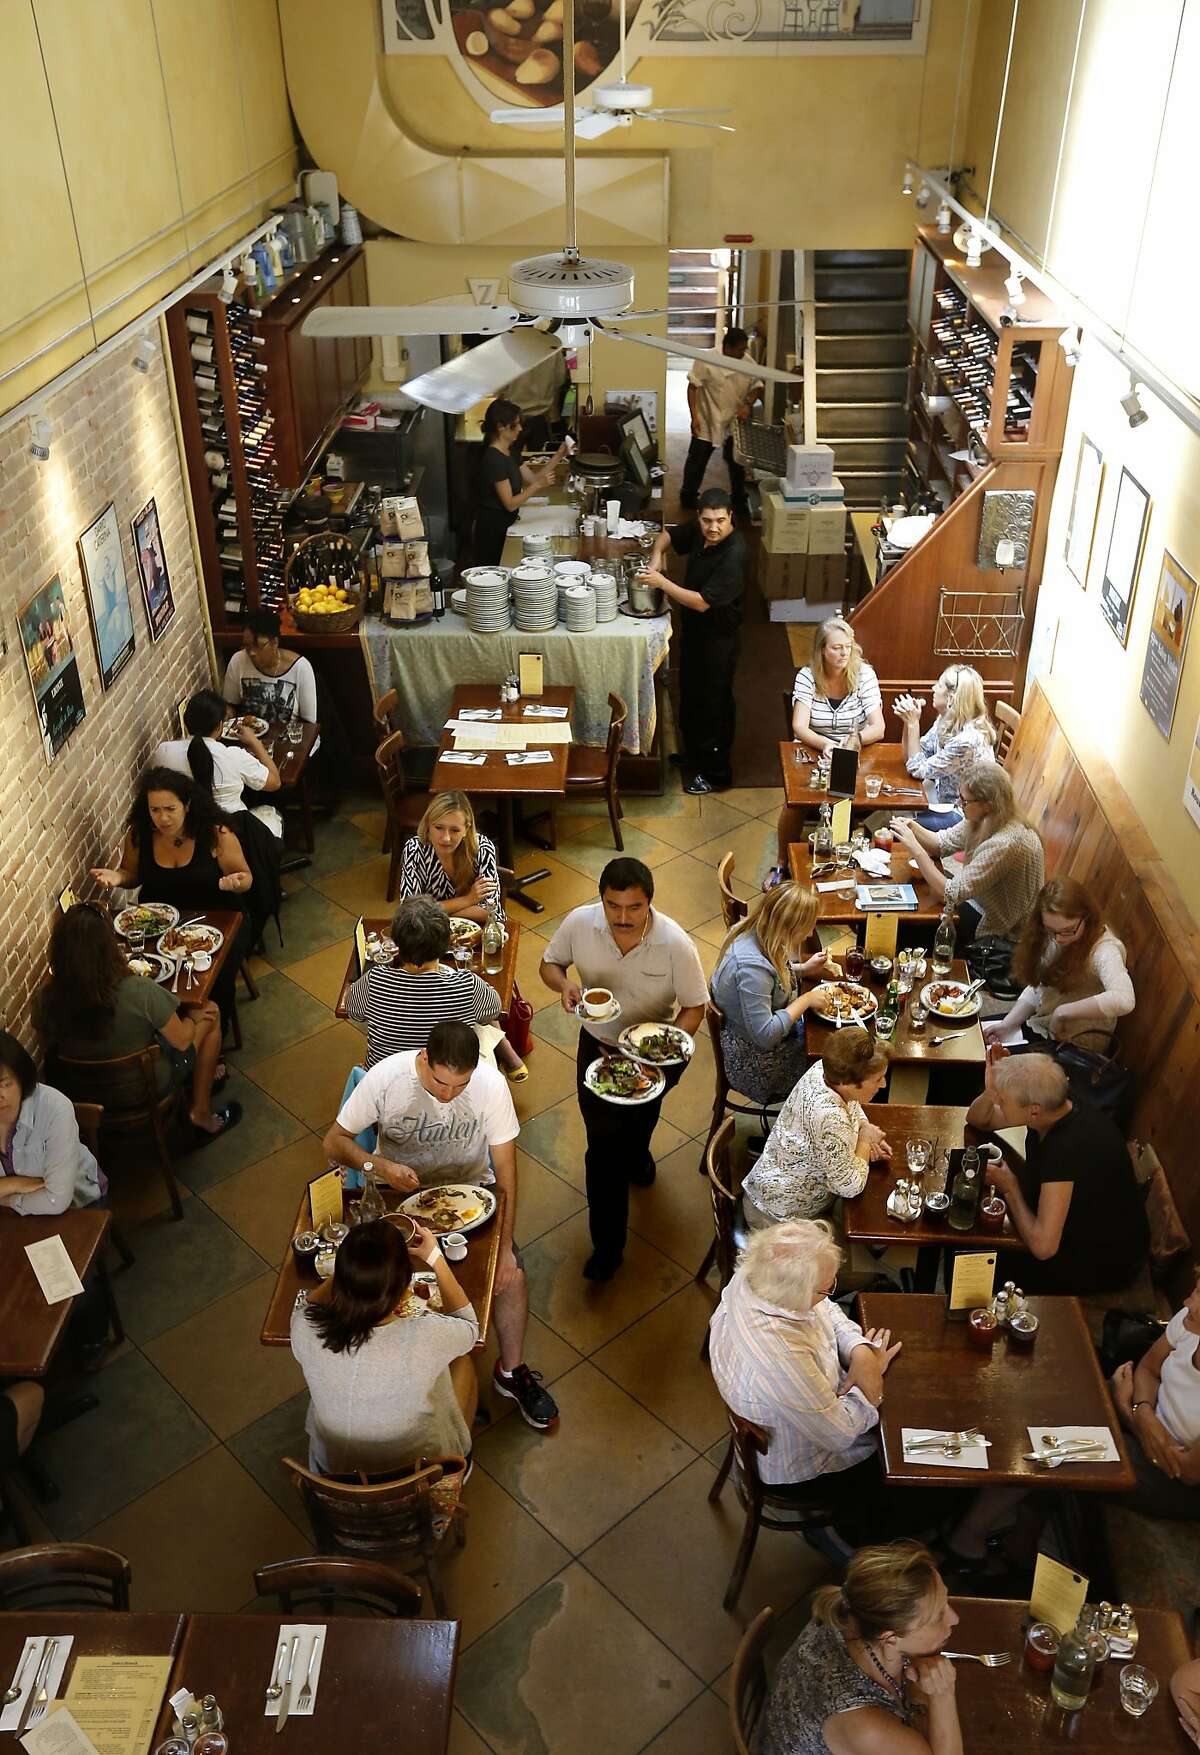 The lunchtime crowd being served at Zazie restaurant, in San Francisco, Calif., on Wednesday Aug. 27, 2014. Jen Piallat owner of Zazie offers her employees fixed schedules, full benefits and matching 401k plans and she says her business is more successful for it.